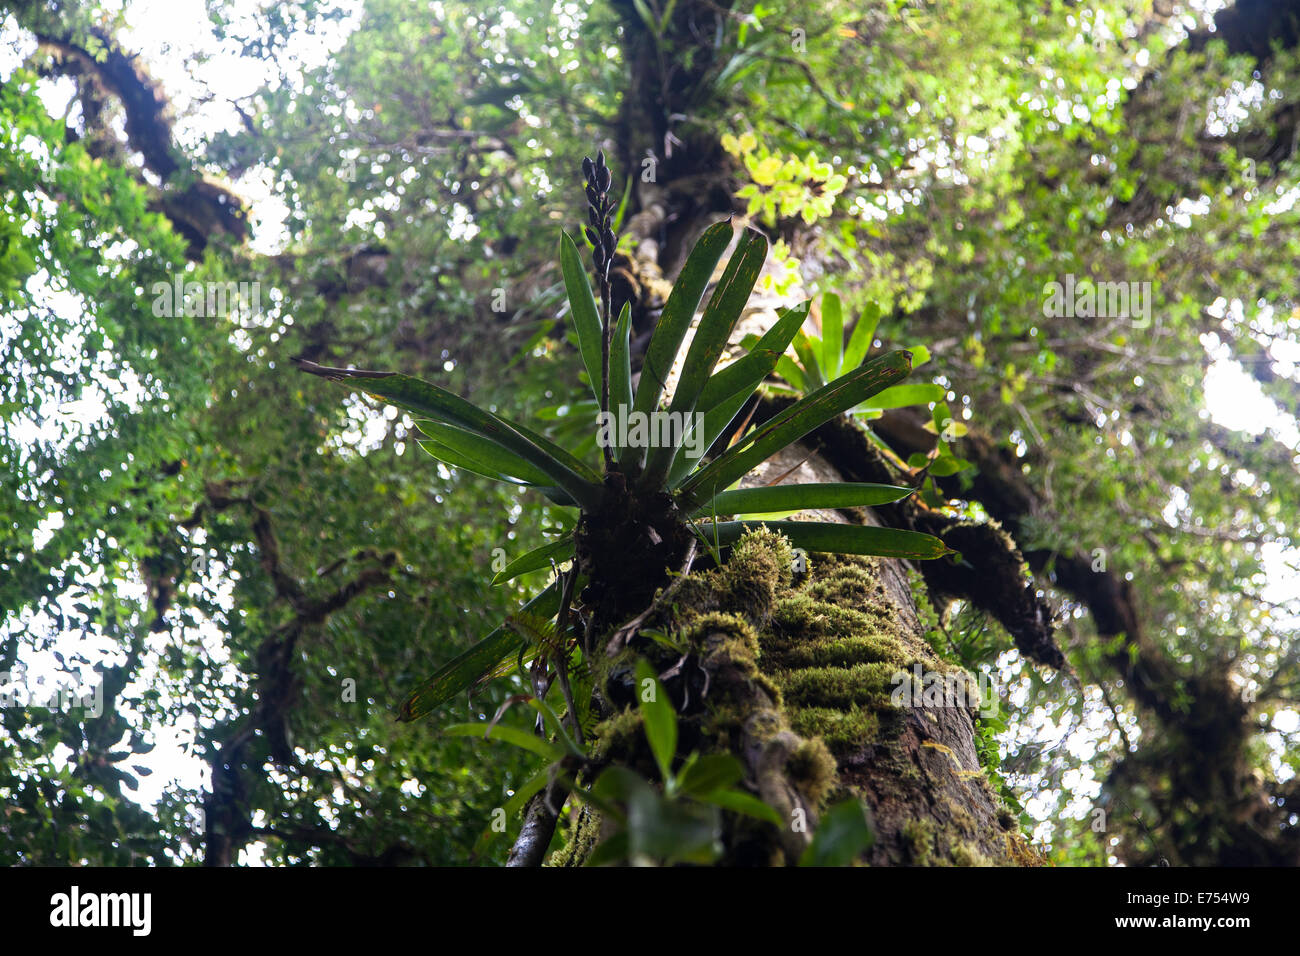 An epiphyte in Costa Rica Stock Photo